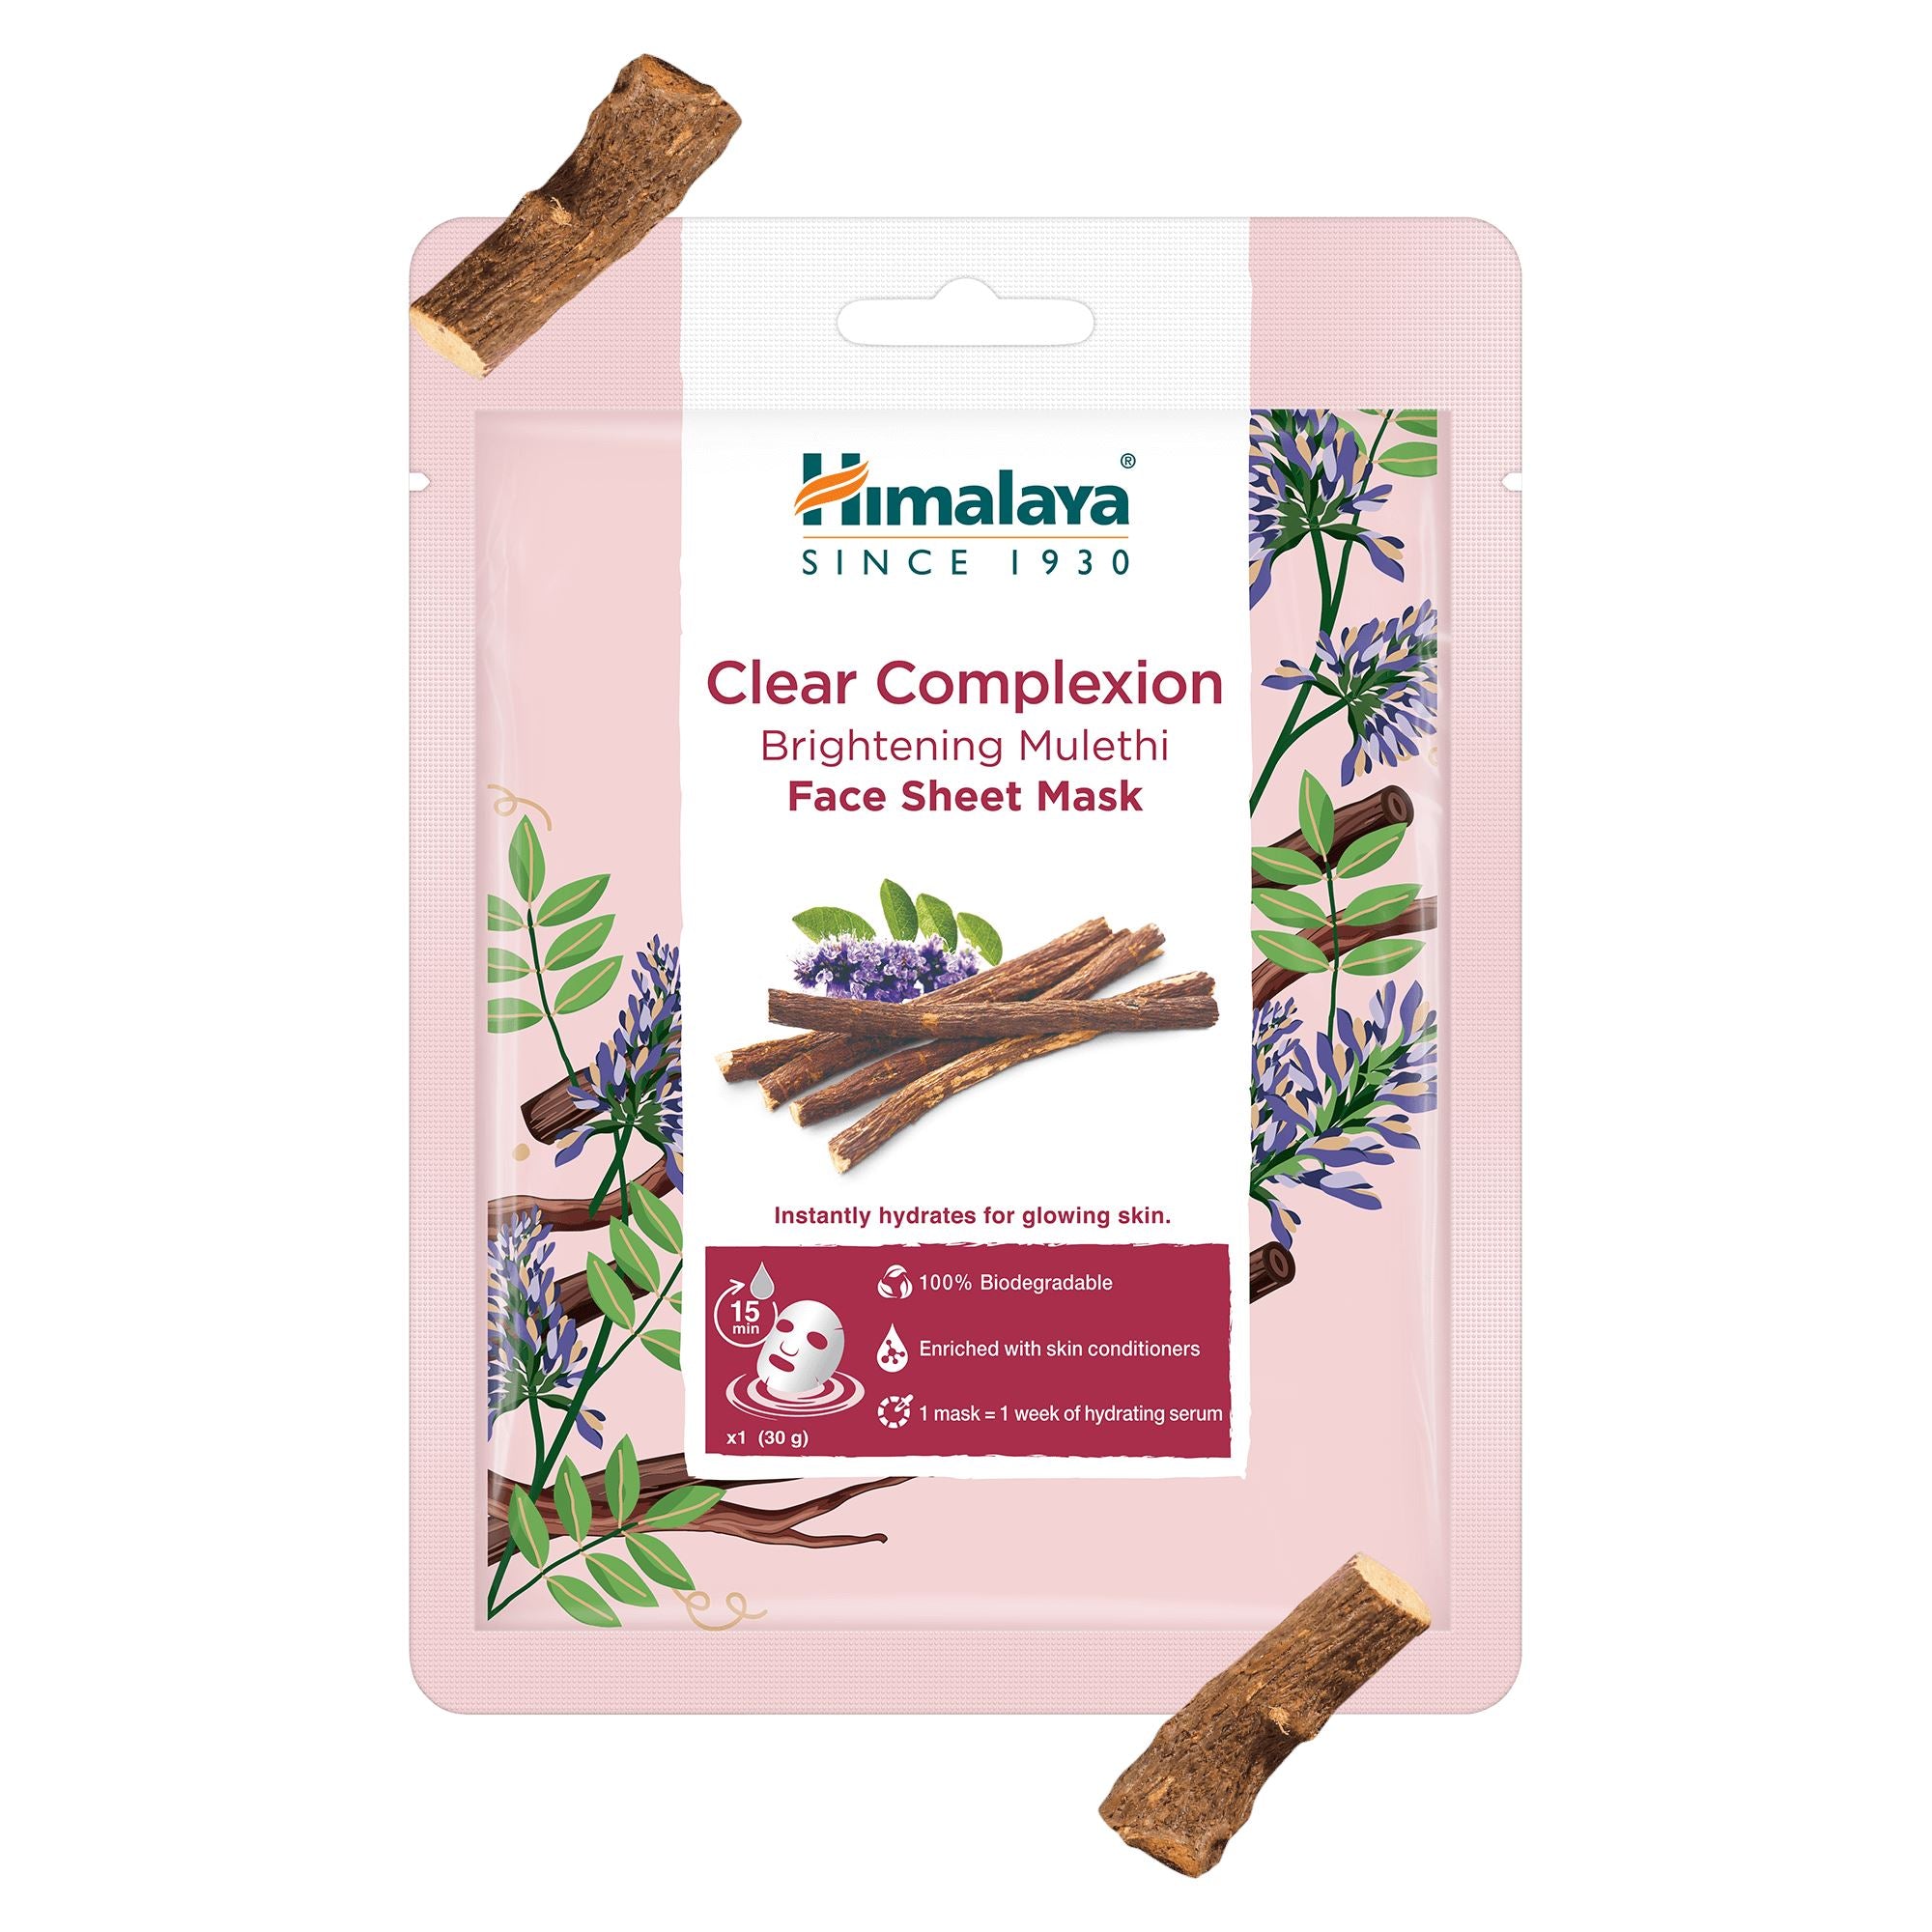 Himalaya Clear Complexion Brightening Mulethi Face Sheet Mask